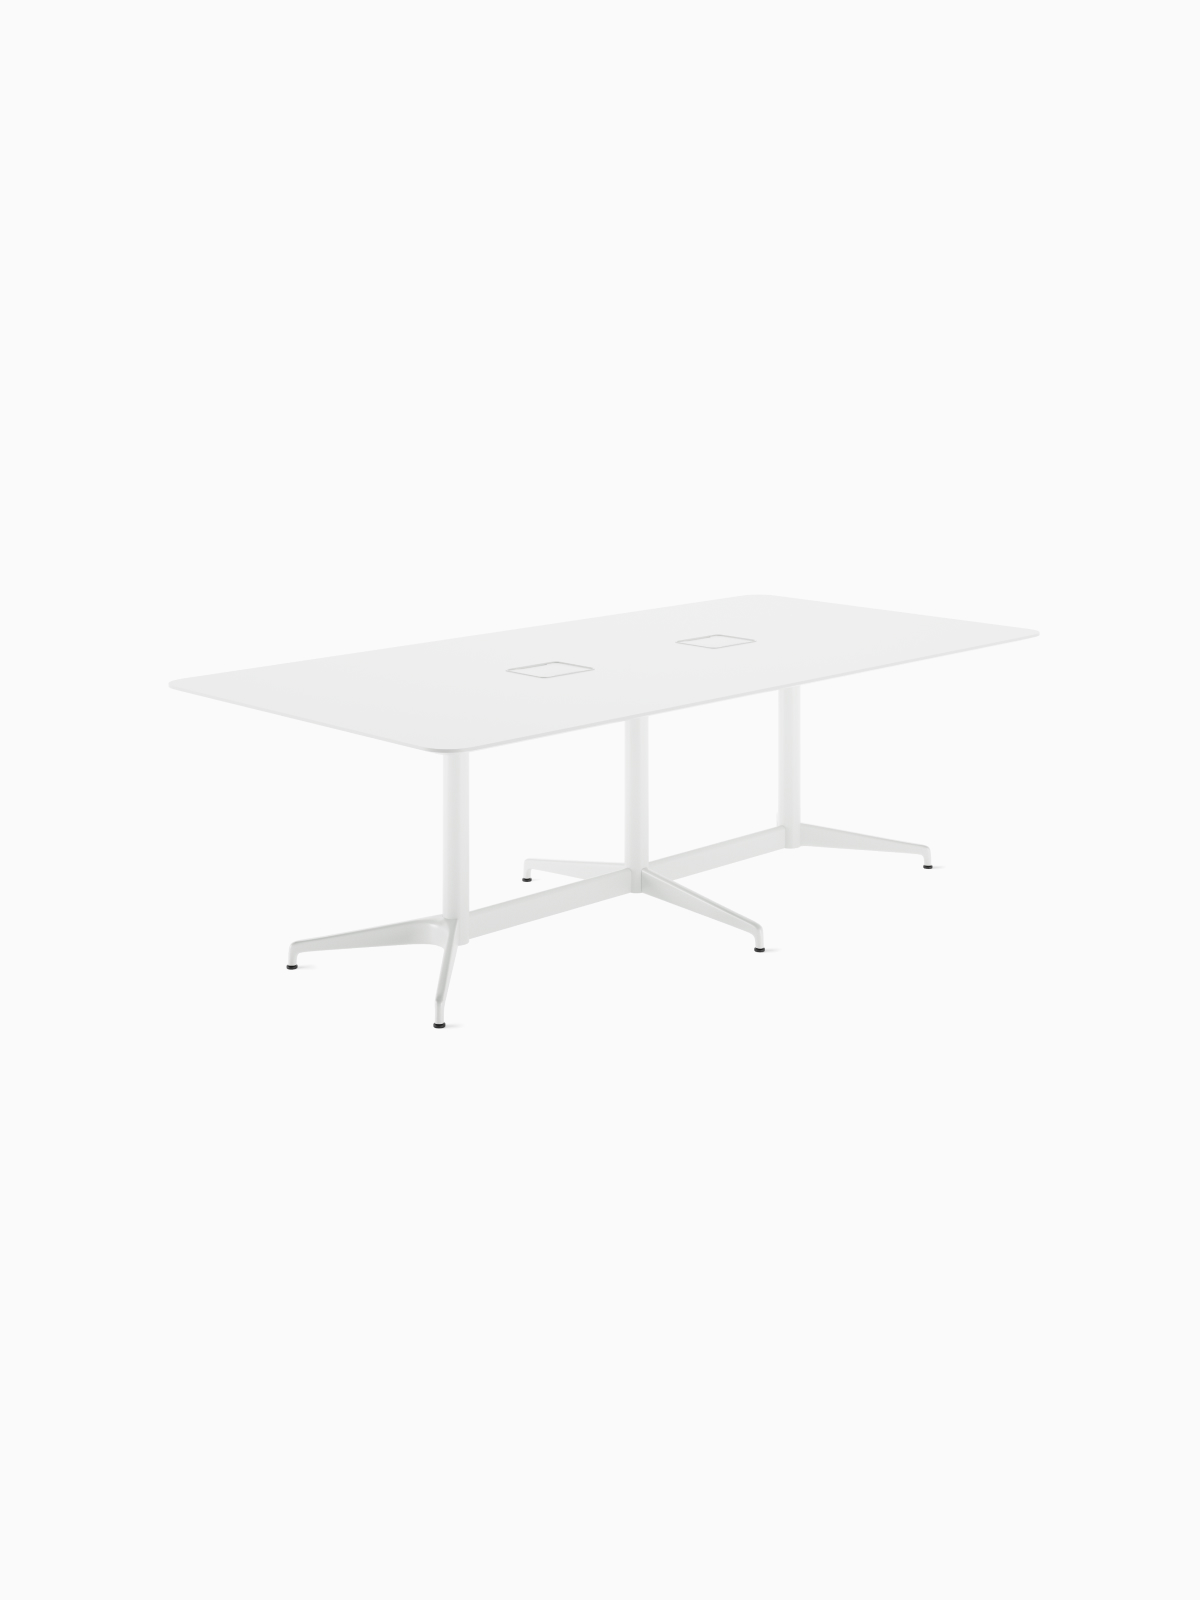 Civic Tables